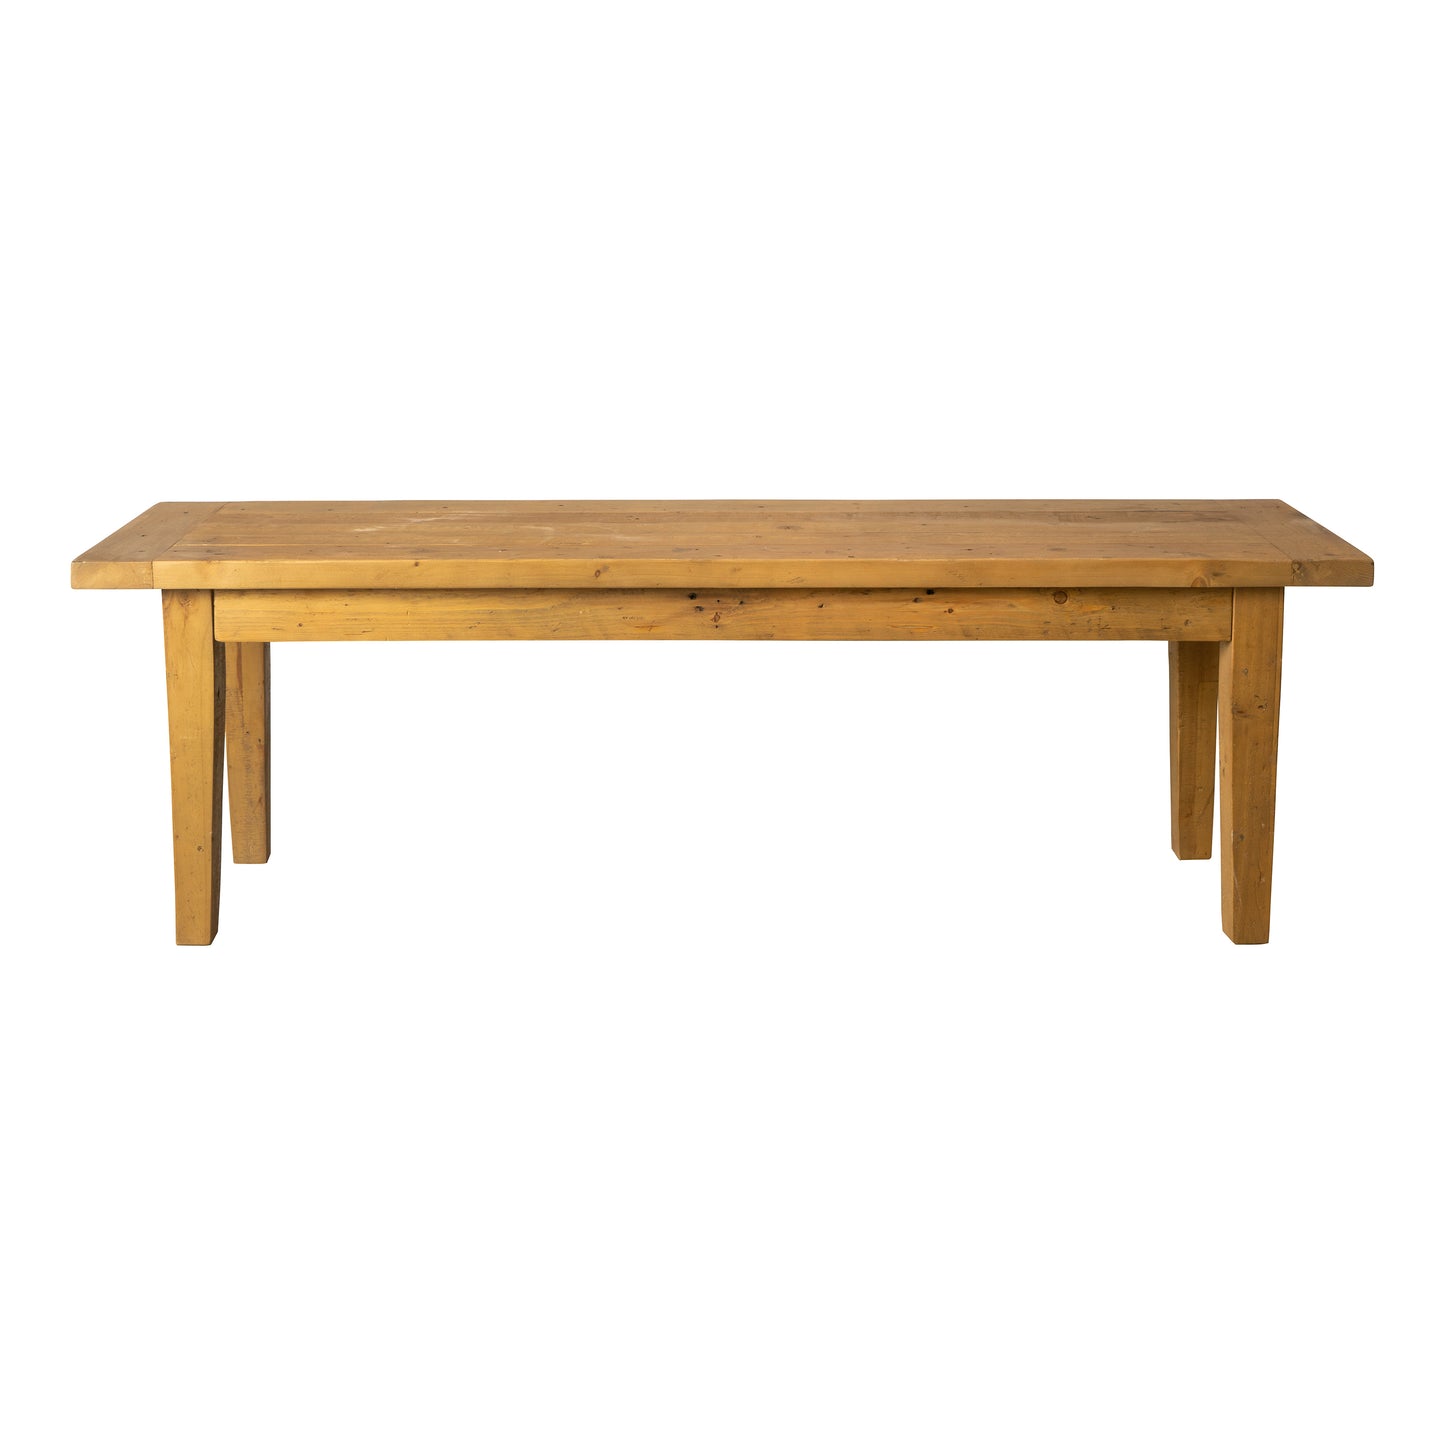 A Marldon Dining Bench 1400x380x450mm for interior decor.